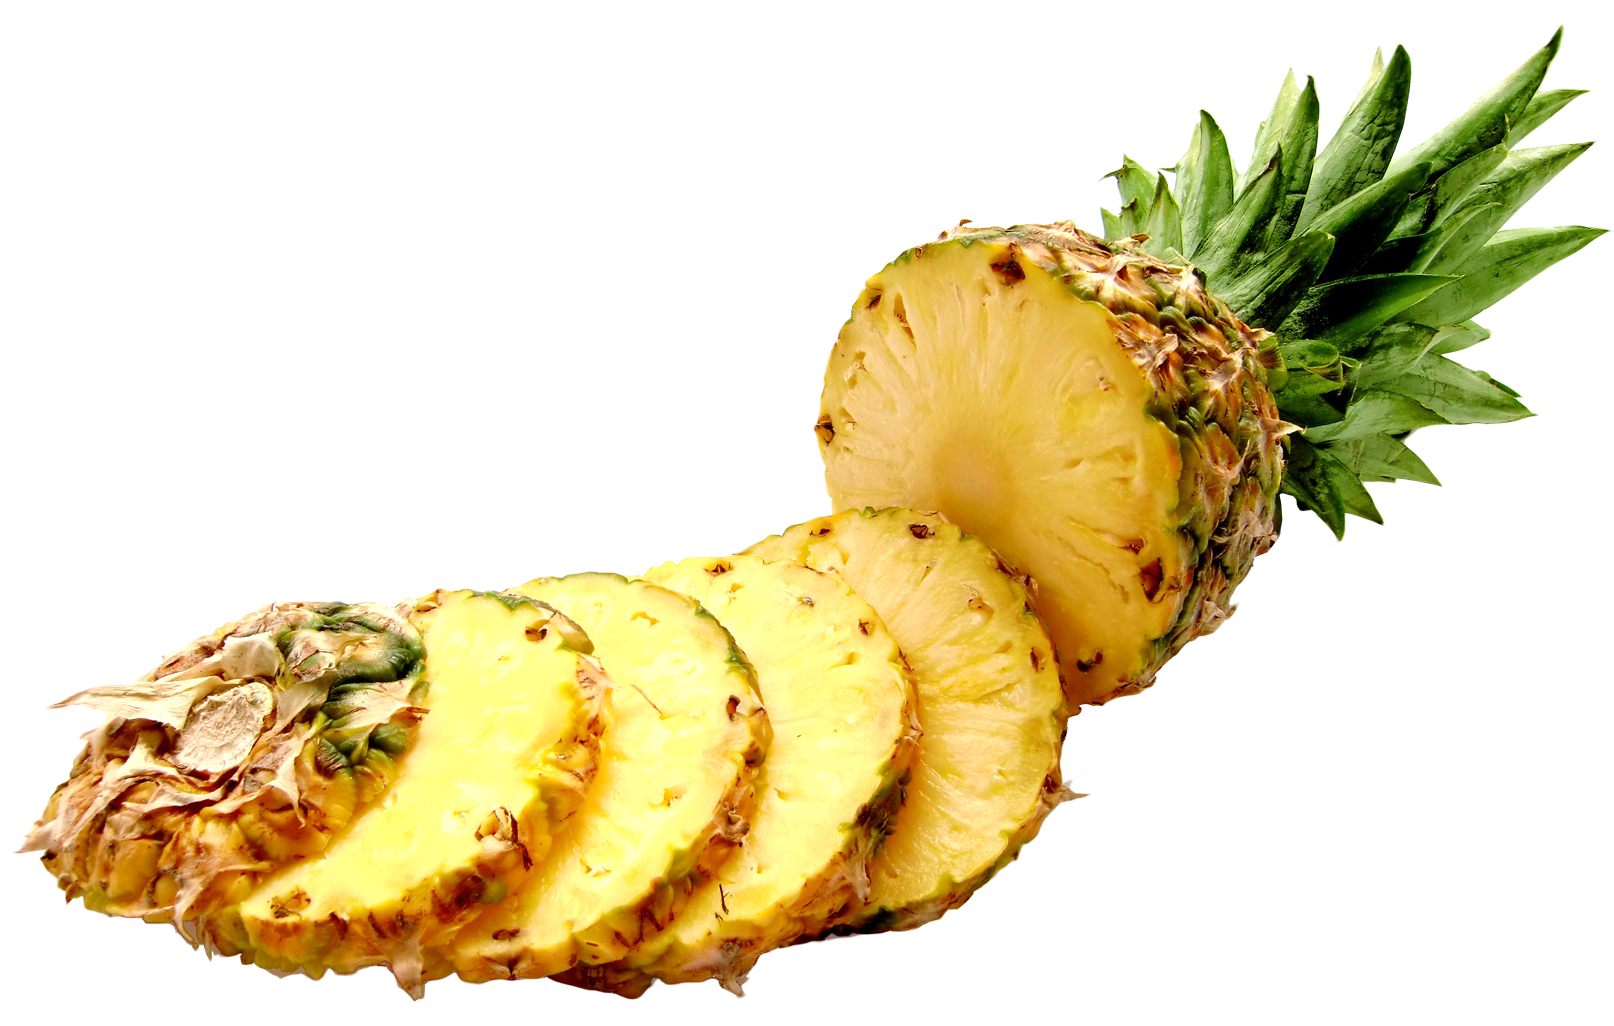 A Sliced Pineapple On A Black Background